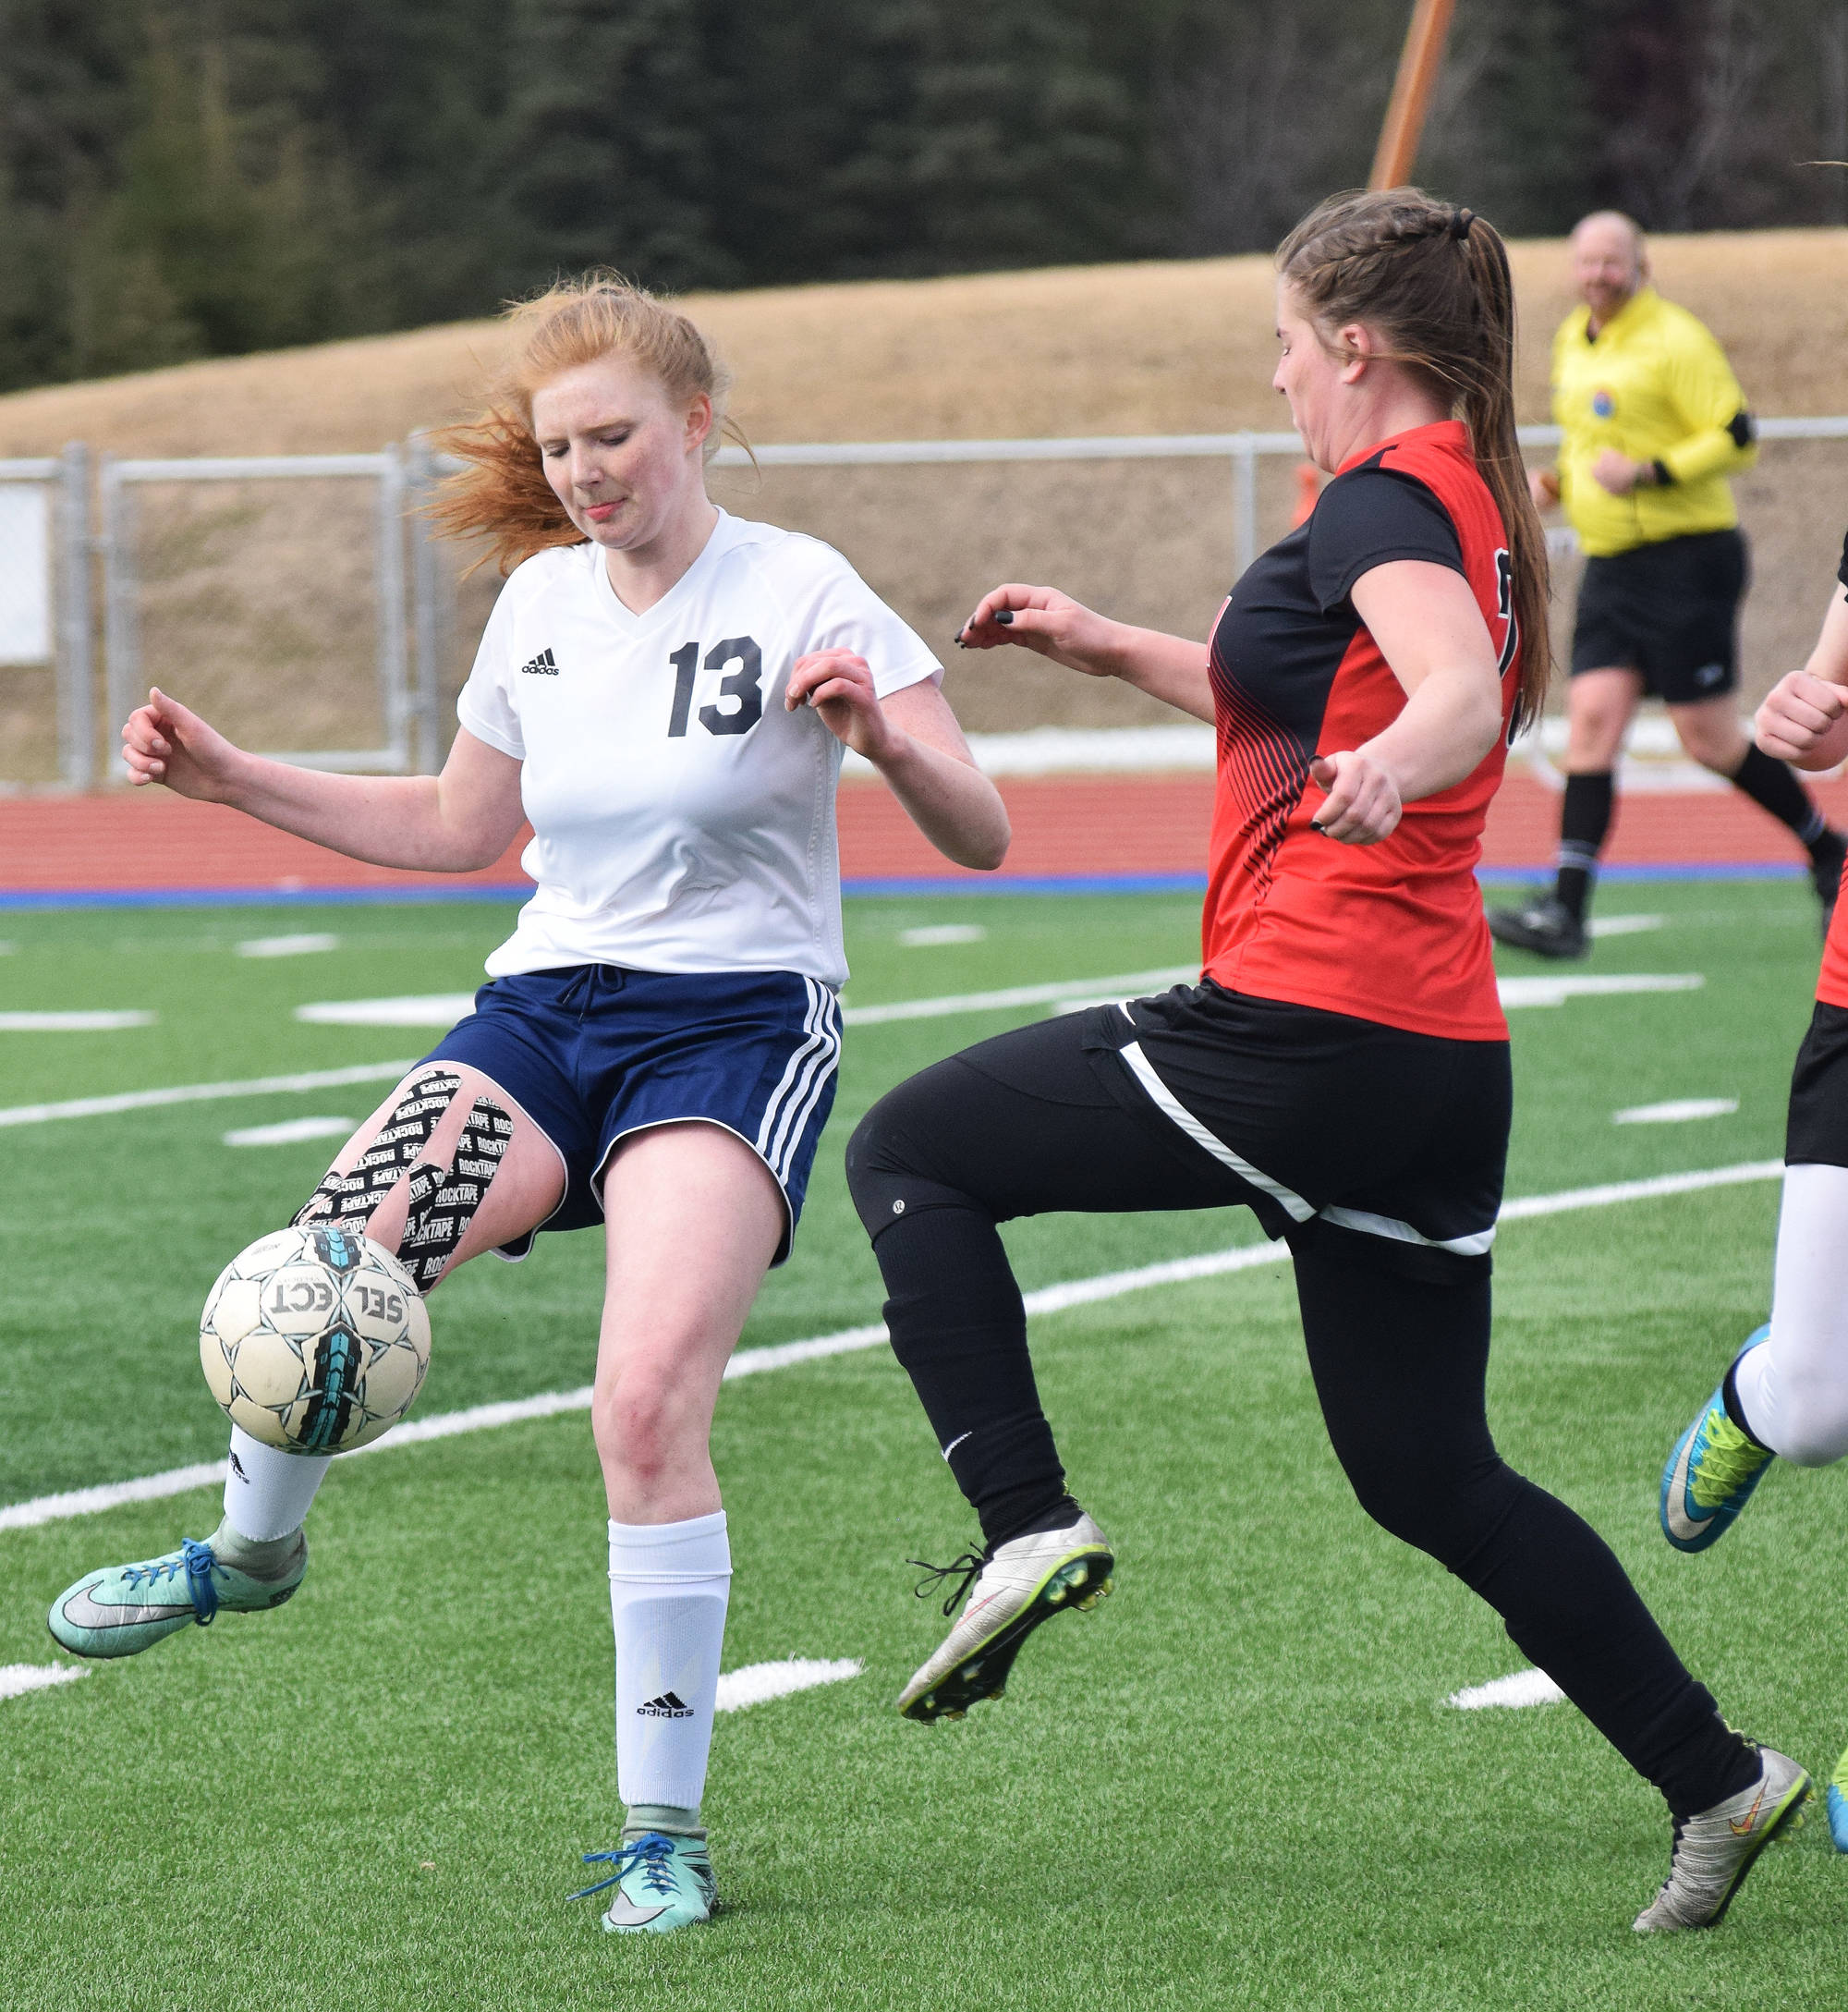 Soldotna’s Kianna Holland works to keep the ball from Kenai Central’s Olivia Brewer Tuesday at Justin Maile Field in Soldotna. (Photo by Joey Klecka/Peninsula Clarion)